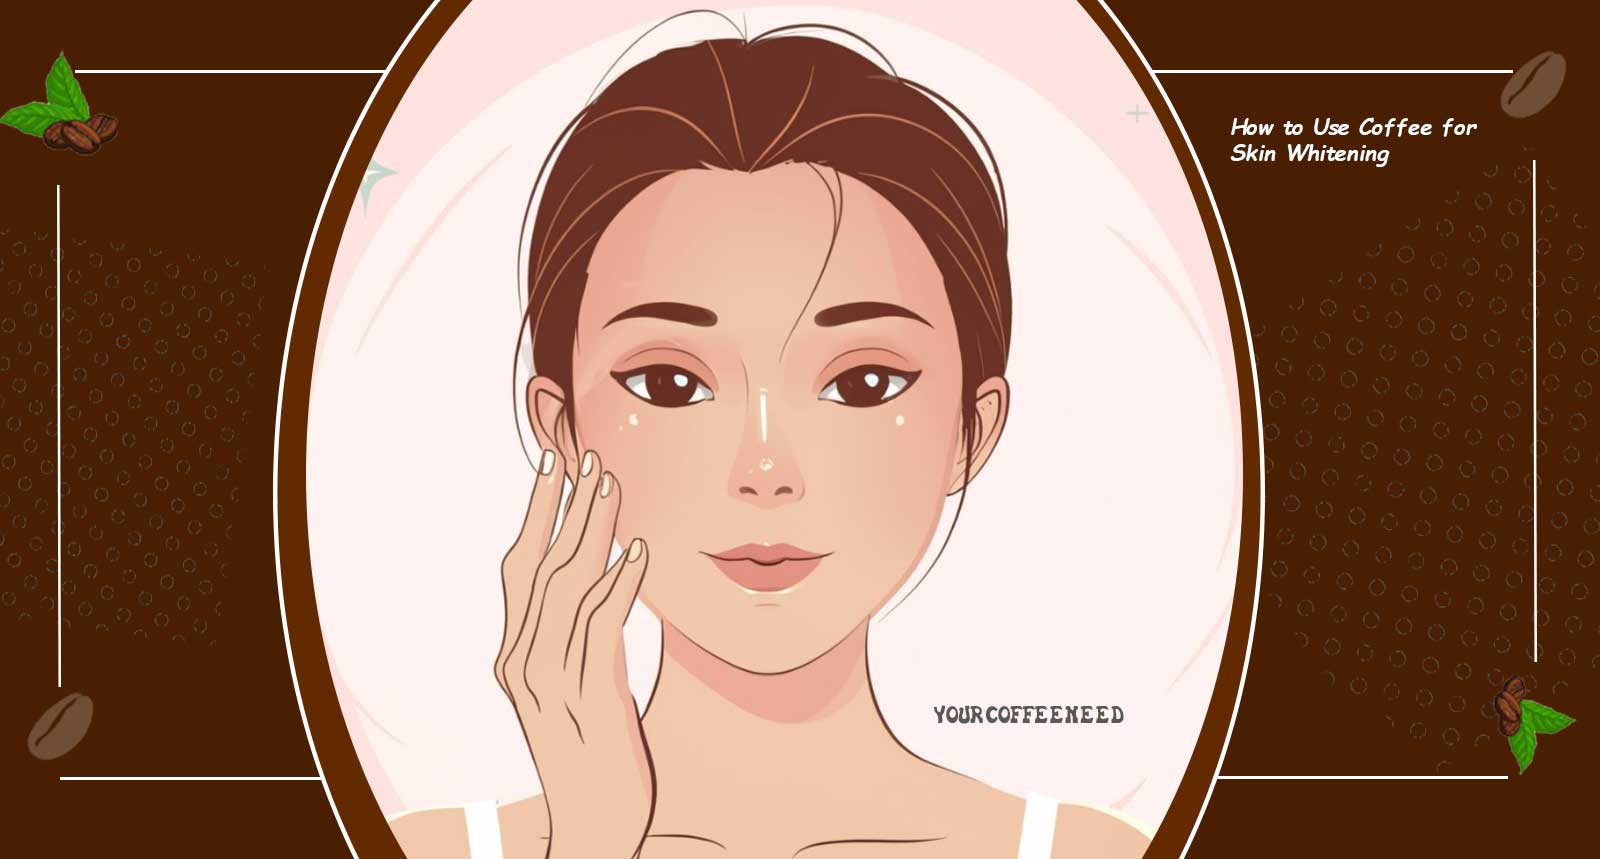 How to Use Coffee for Skin Whitening